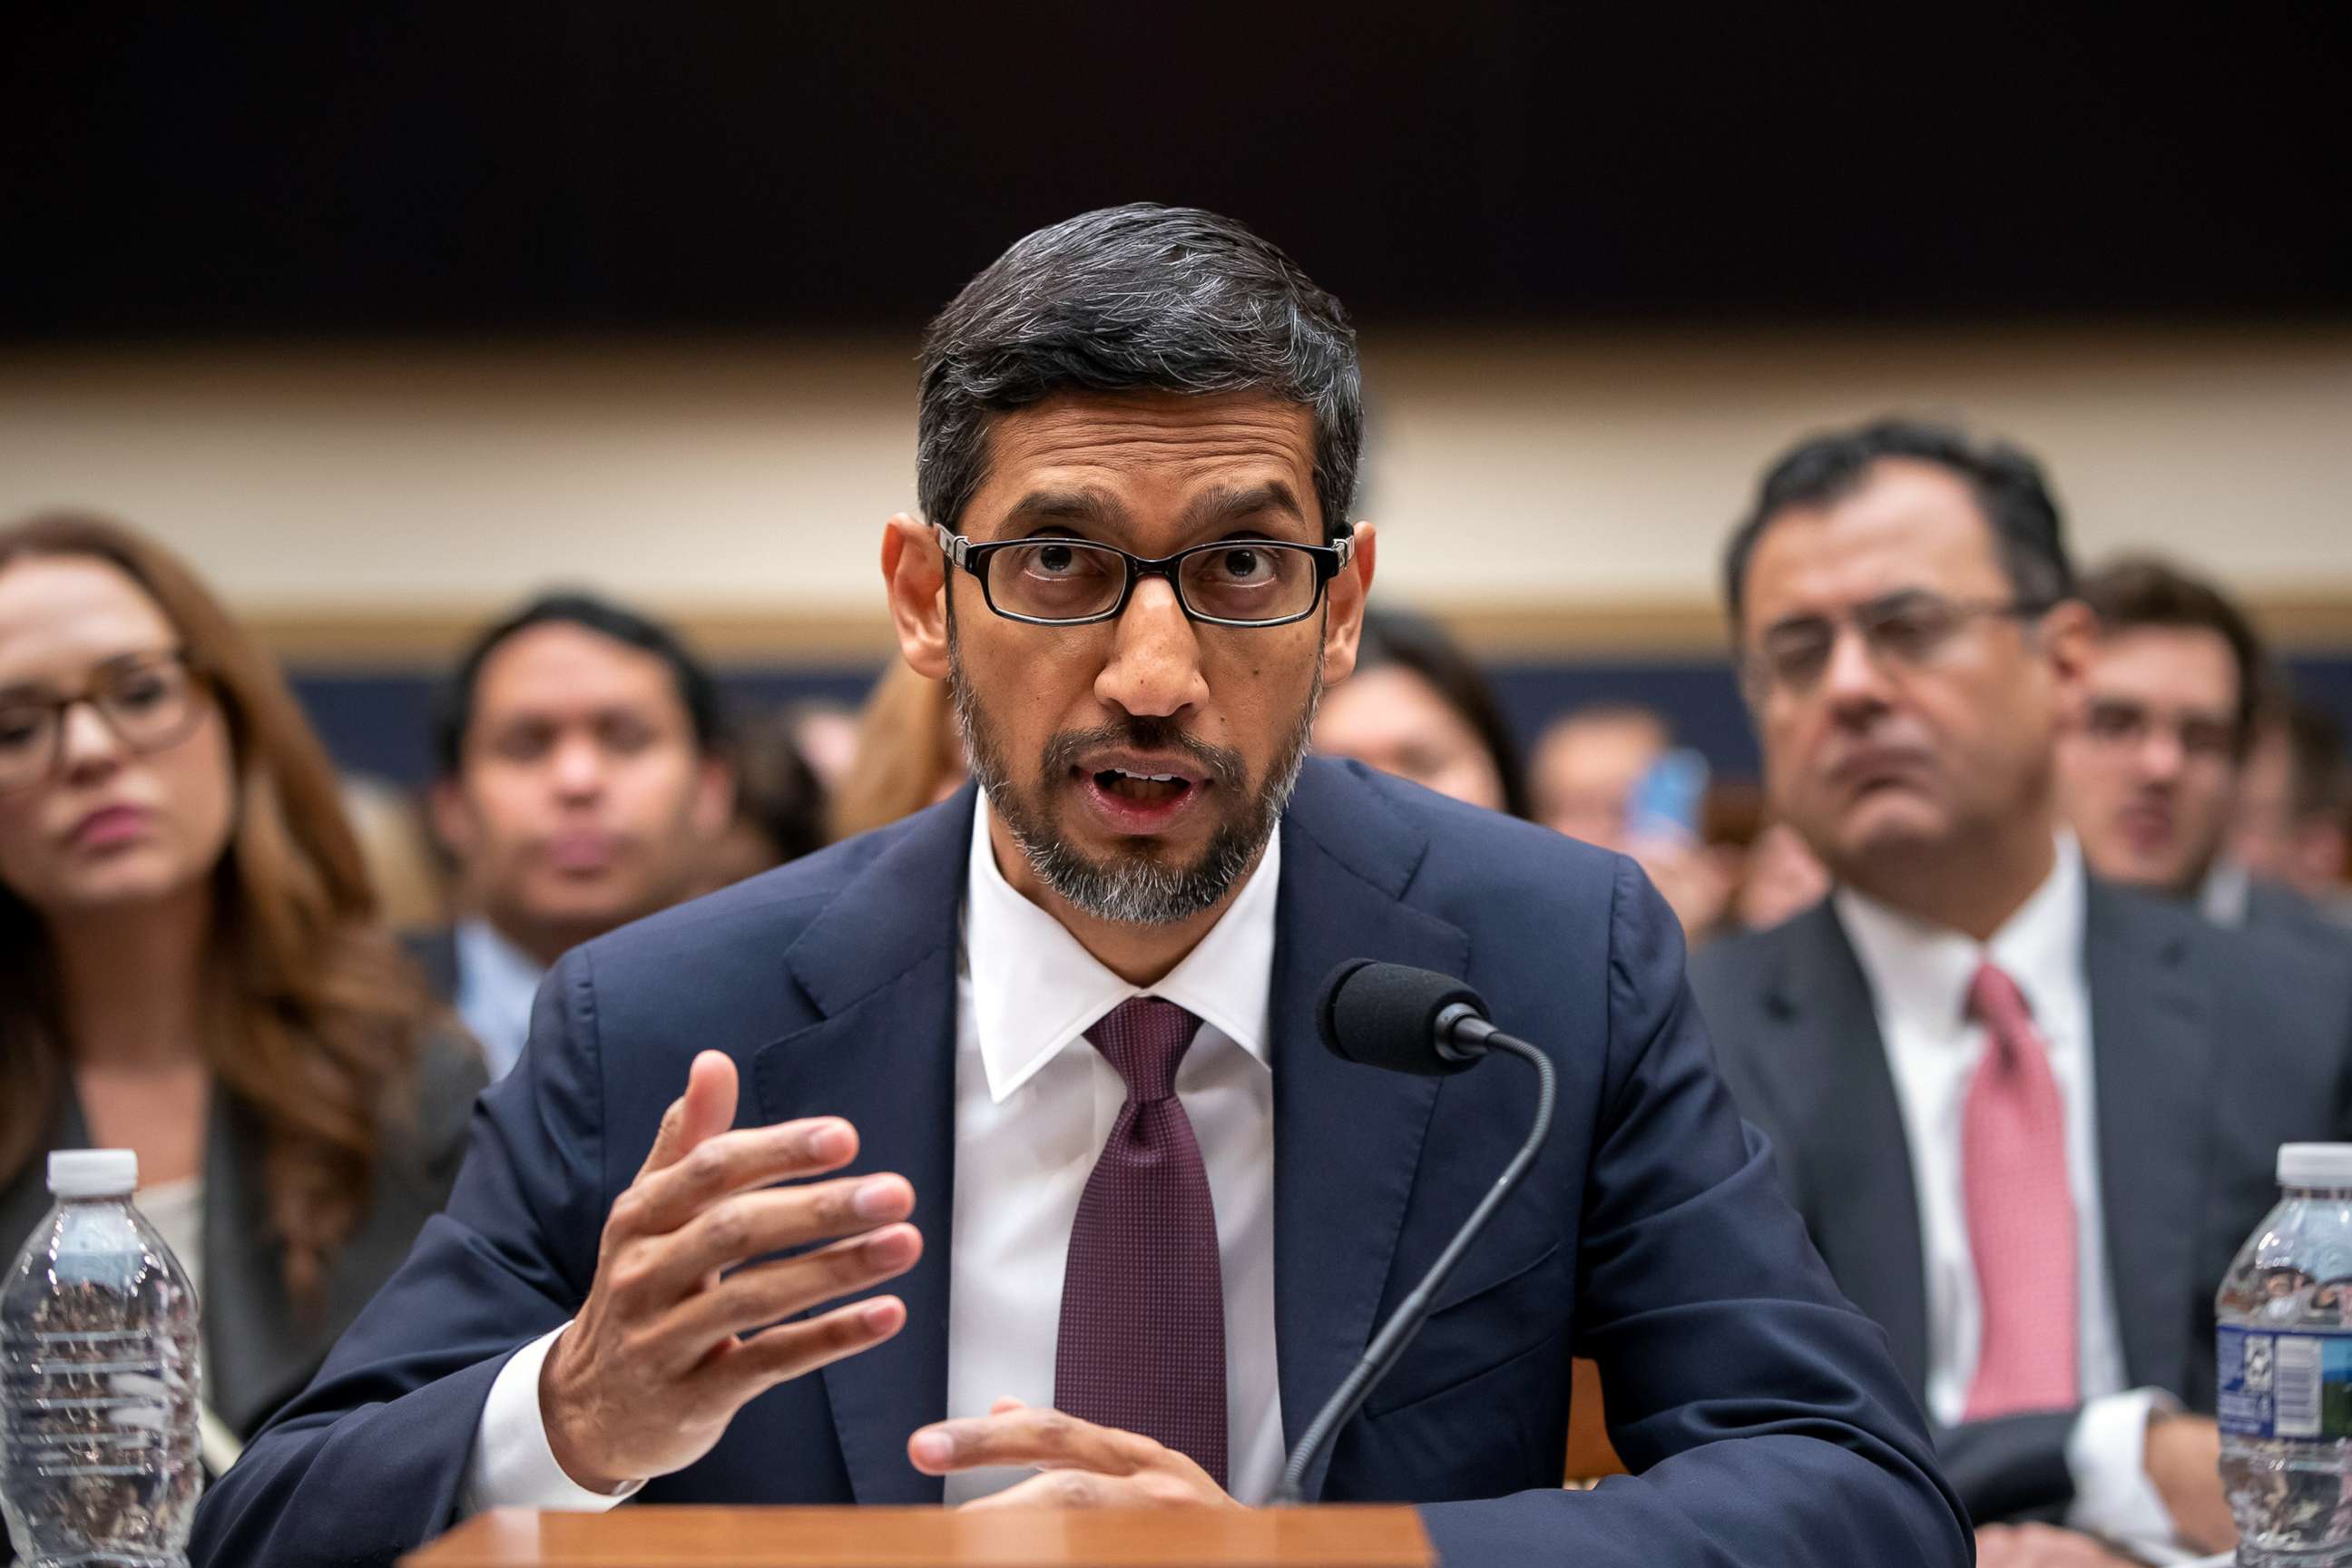 PHOTO: Google CEO Sundar Pichai appears before the House Judiciary Committee to be questioned about the internet giant's privacy security and data collection, on Capitol Hill in Washington, Dec. 11, 2018.